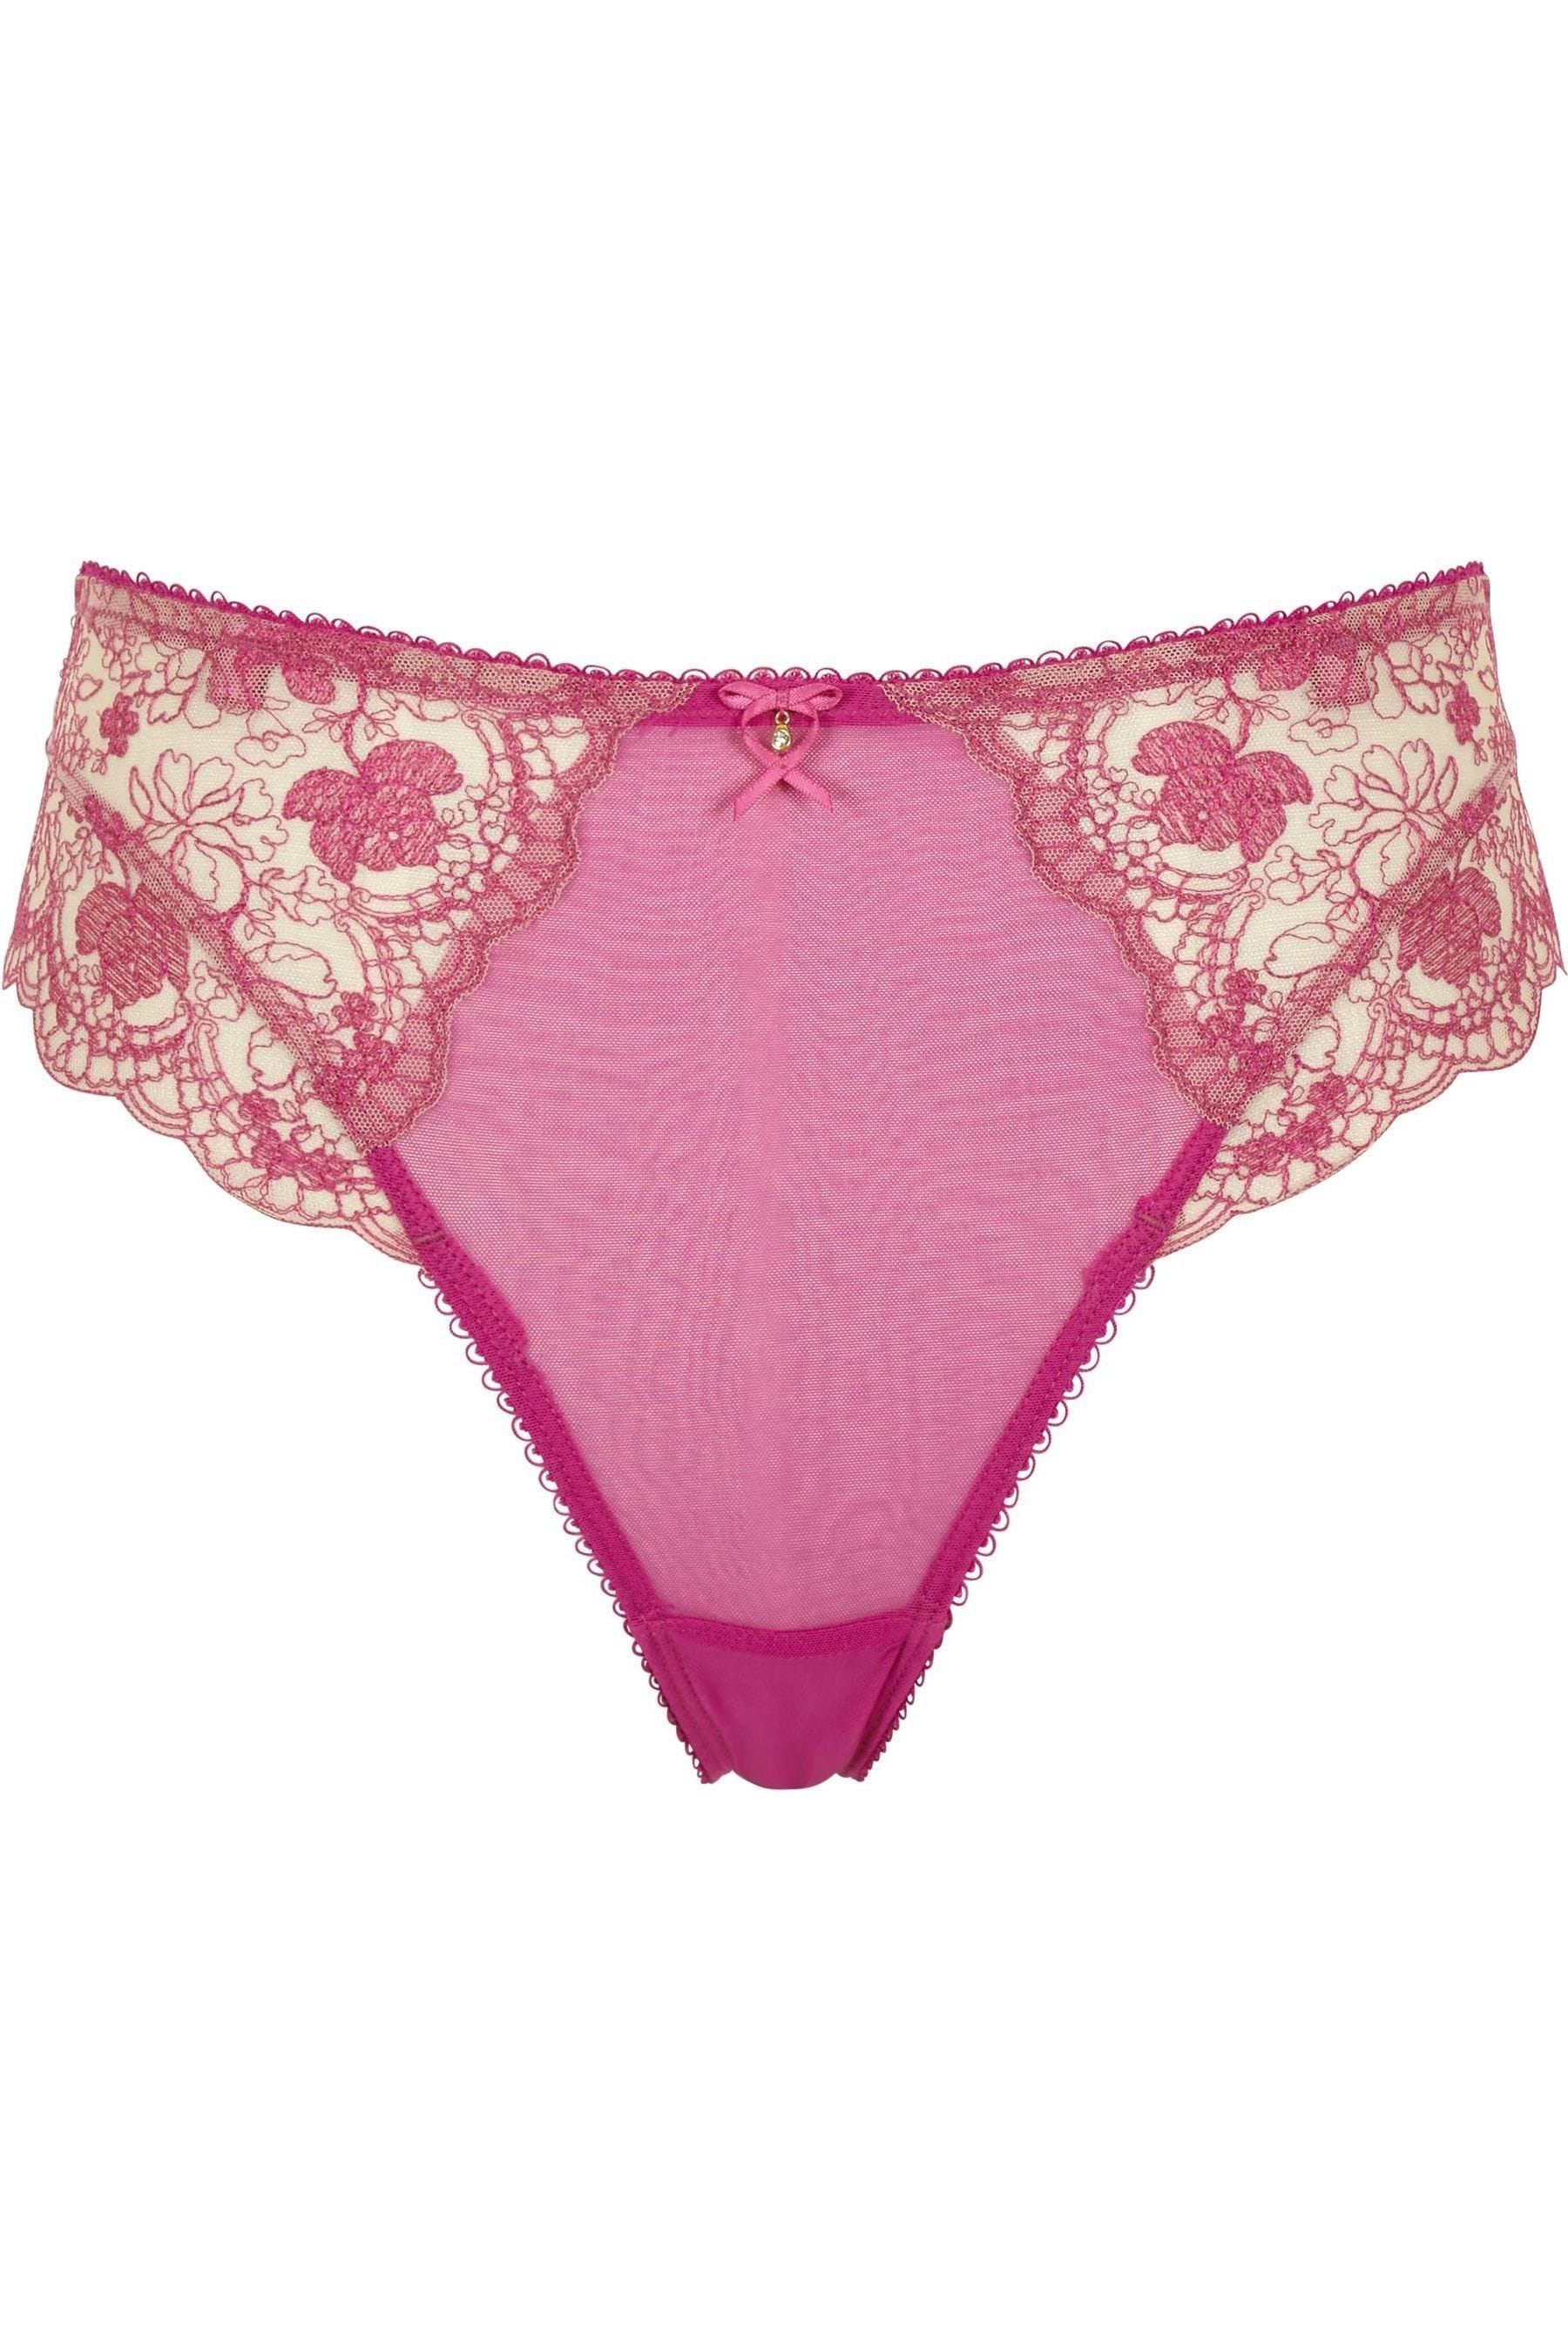 Buy Cleo by Panache Pink Orchid Daphne Suspender Briefs from the Next ...